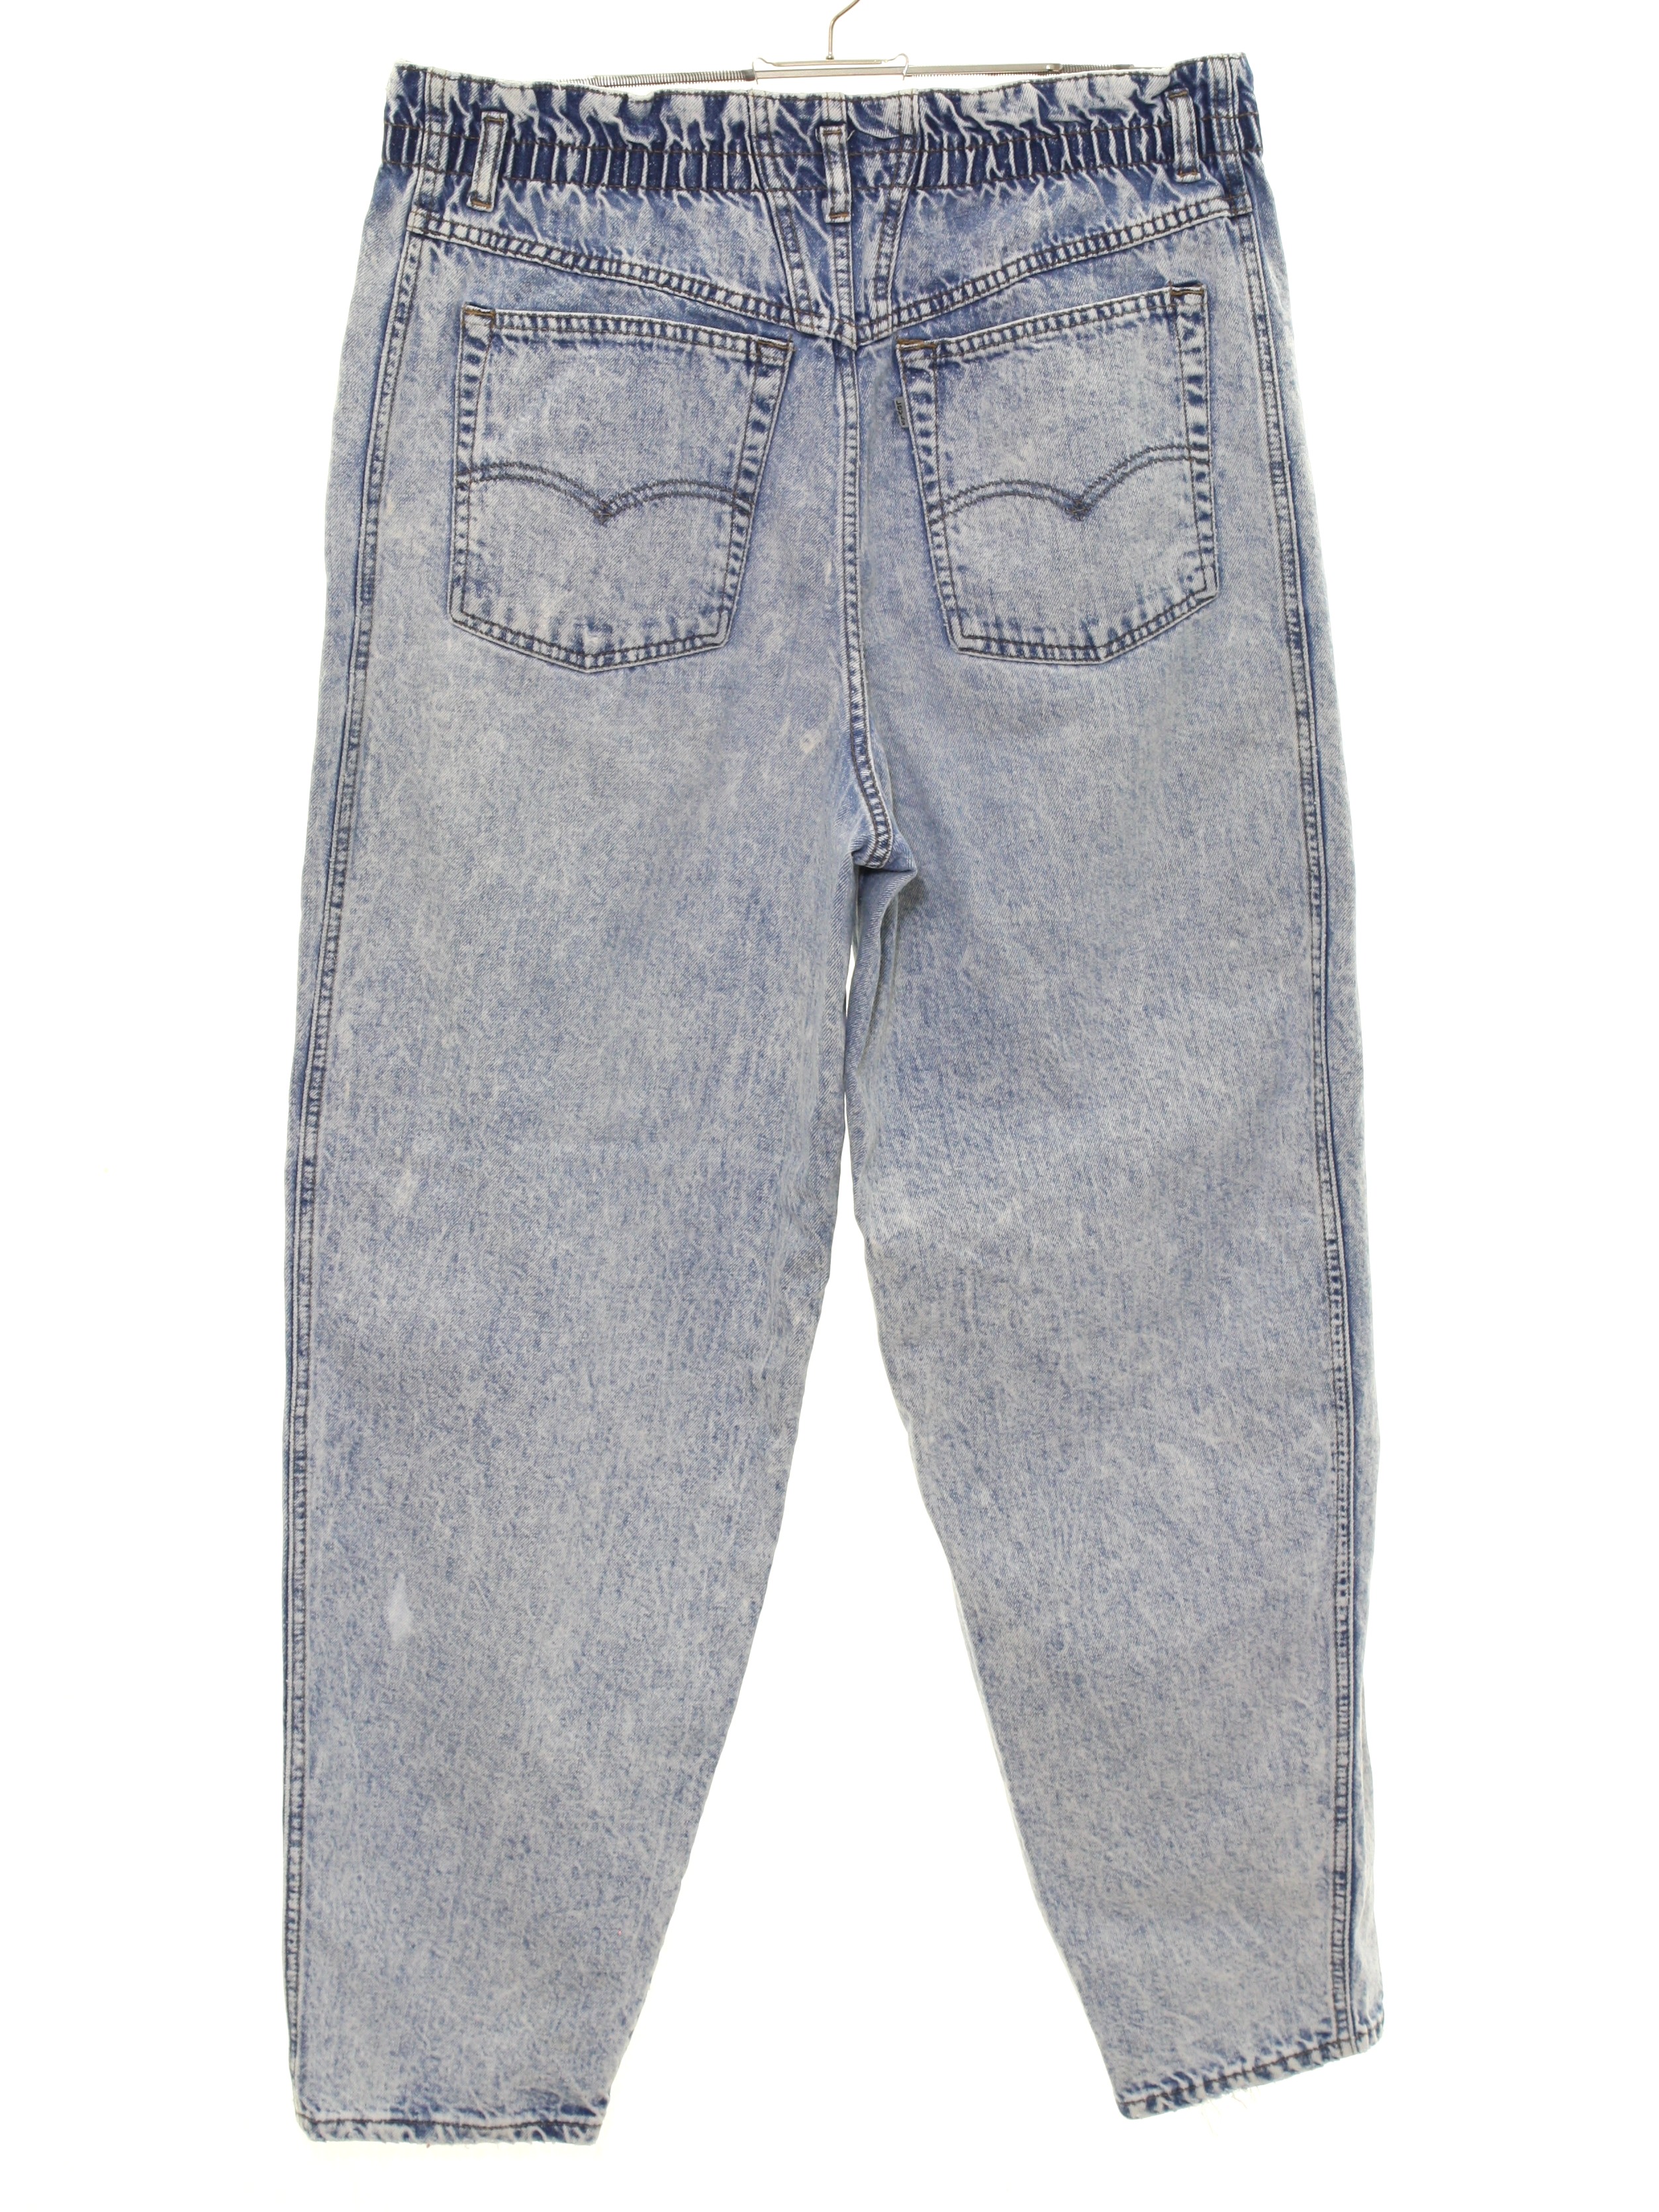 Retro 1980s Pants: 80s -Levis- Womens stone washed slightly faded and ...